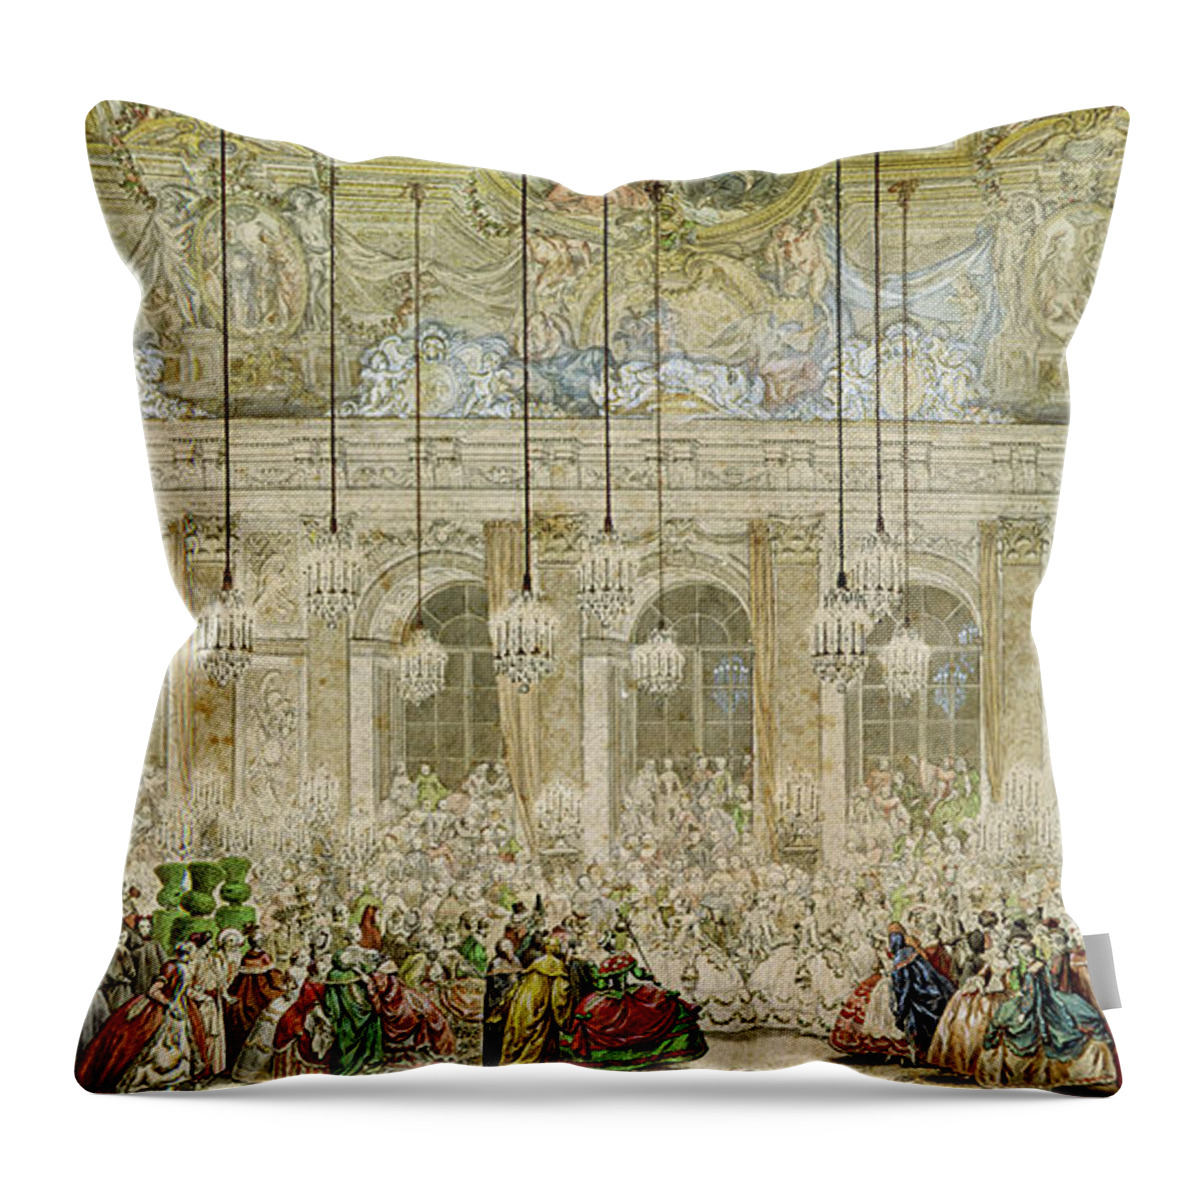 Ball Throw Pillow featuring the painting The Masked Ball at the Galerie des Glaces by Charles Nicolas Cochin II